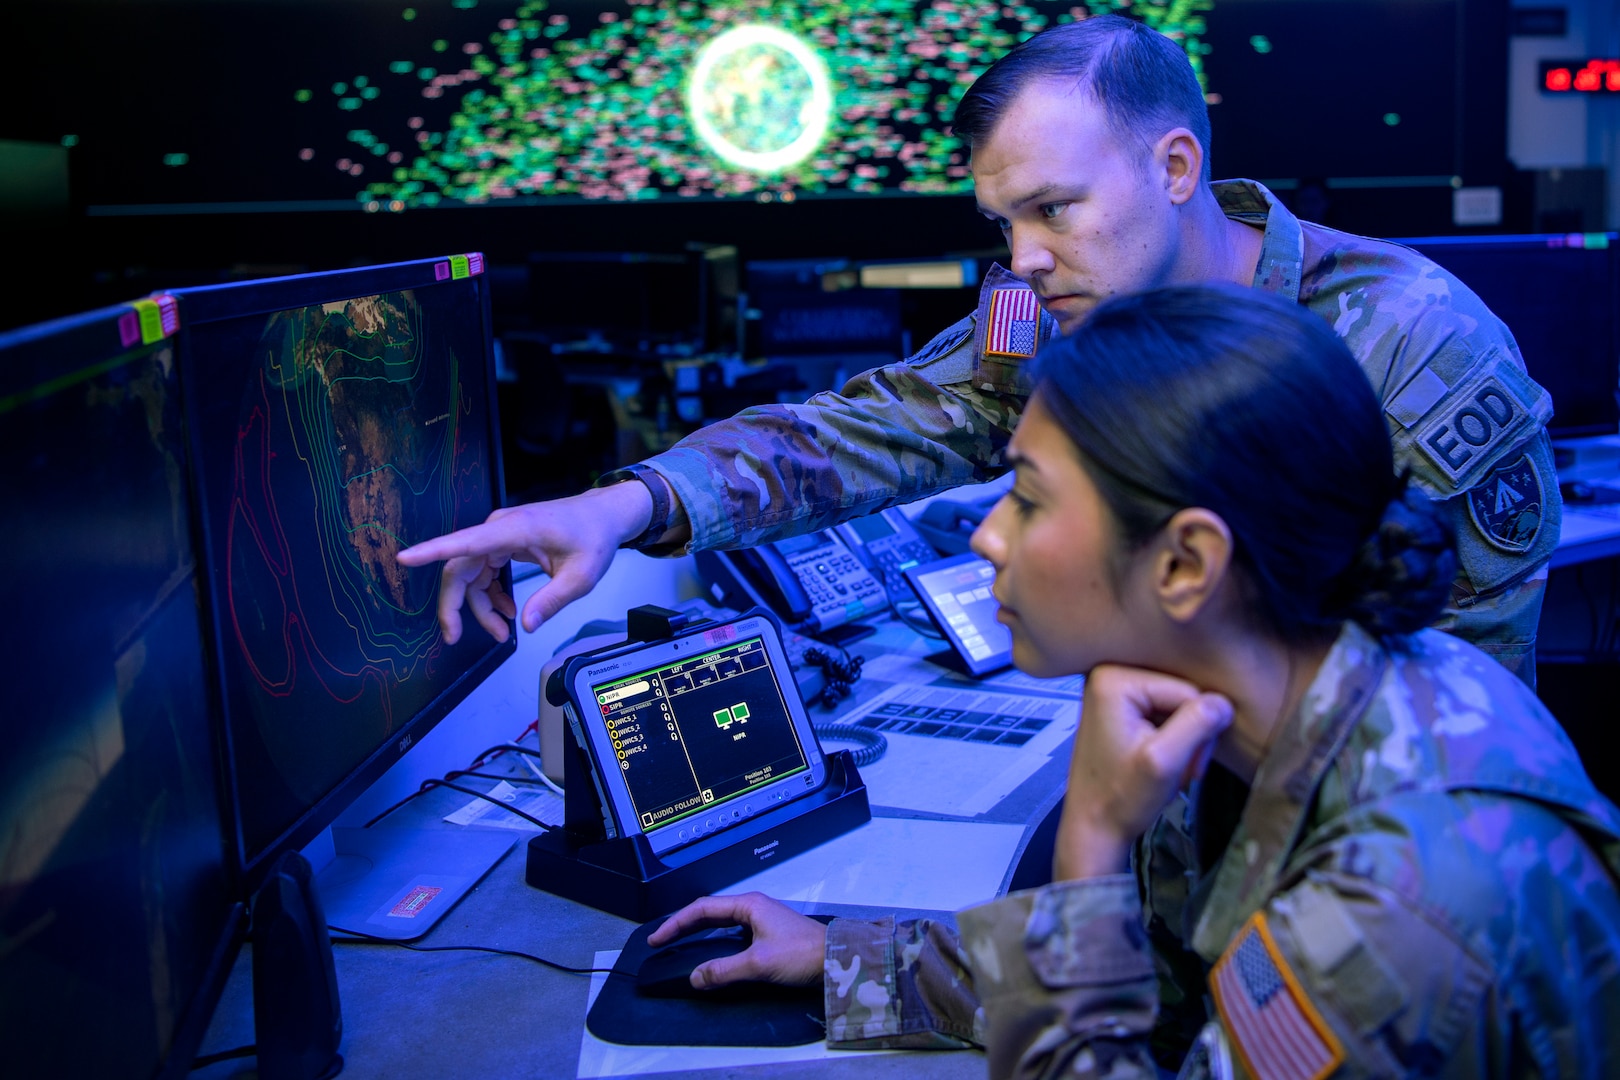 Man and woman in uniform looking at computer screen